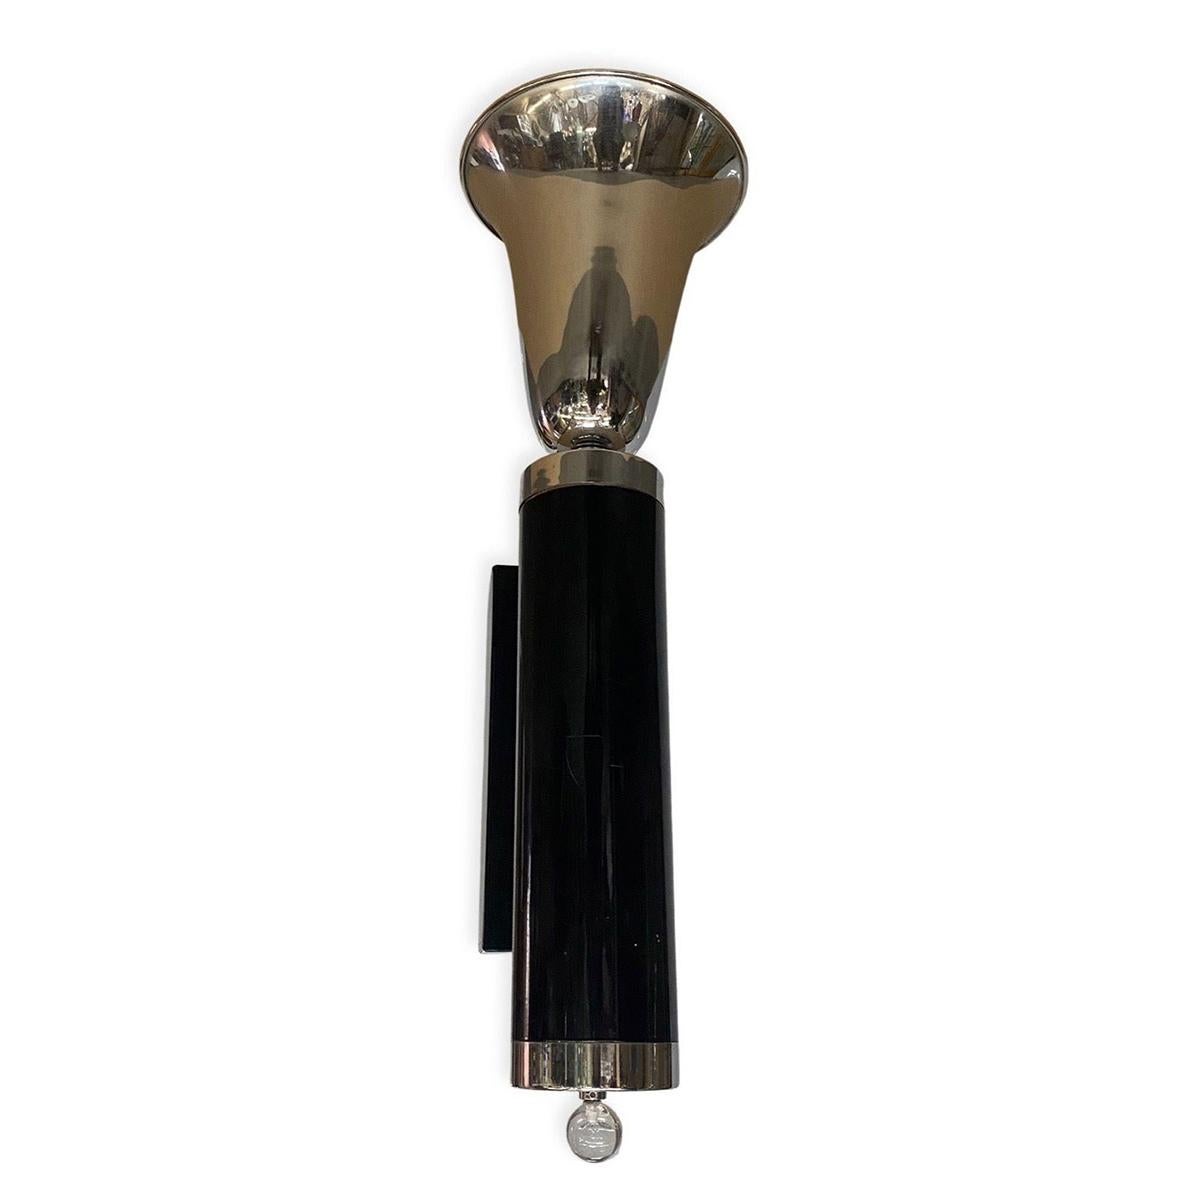 1930s elegant design champagne-shaped torchiere top with black enameled fluted column center. The end of the base has a lucite glass ball. 

5-Available

The dimensions of each sconce are:
Height 29